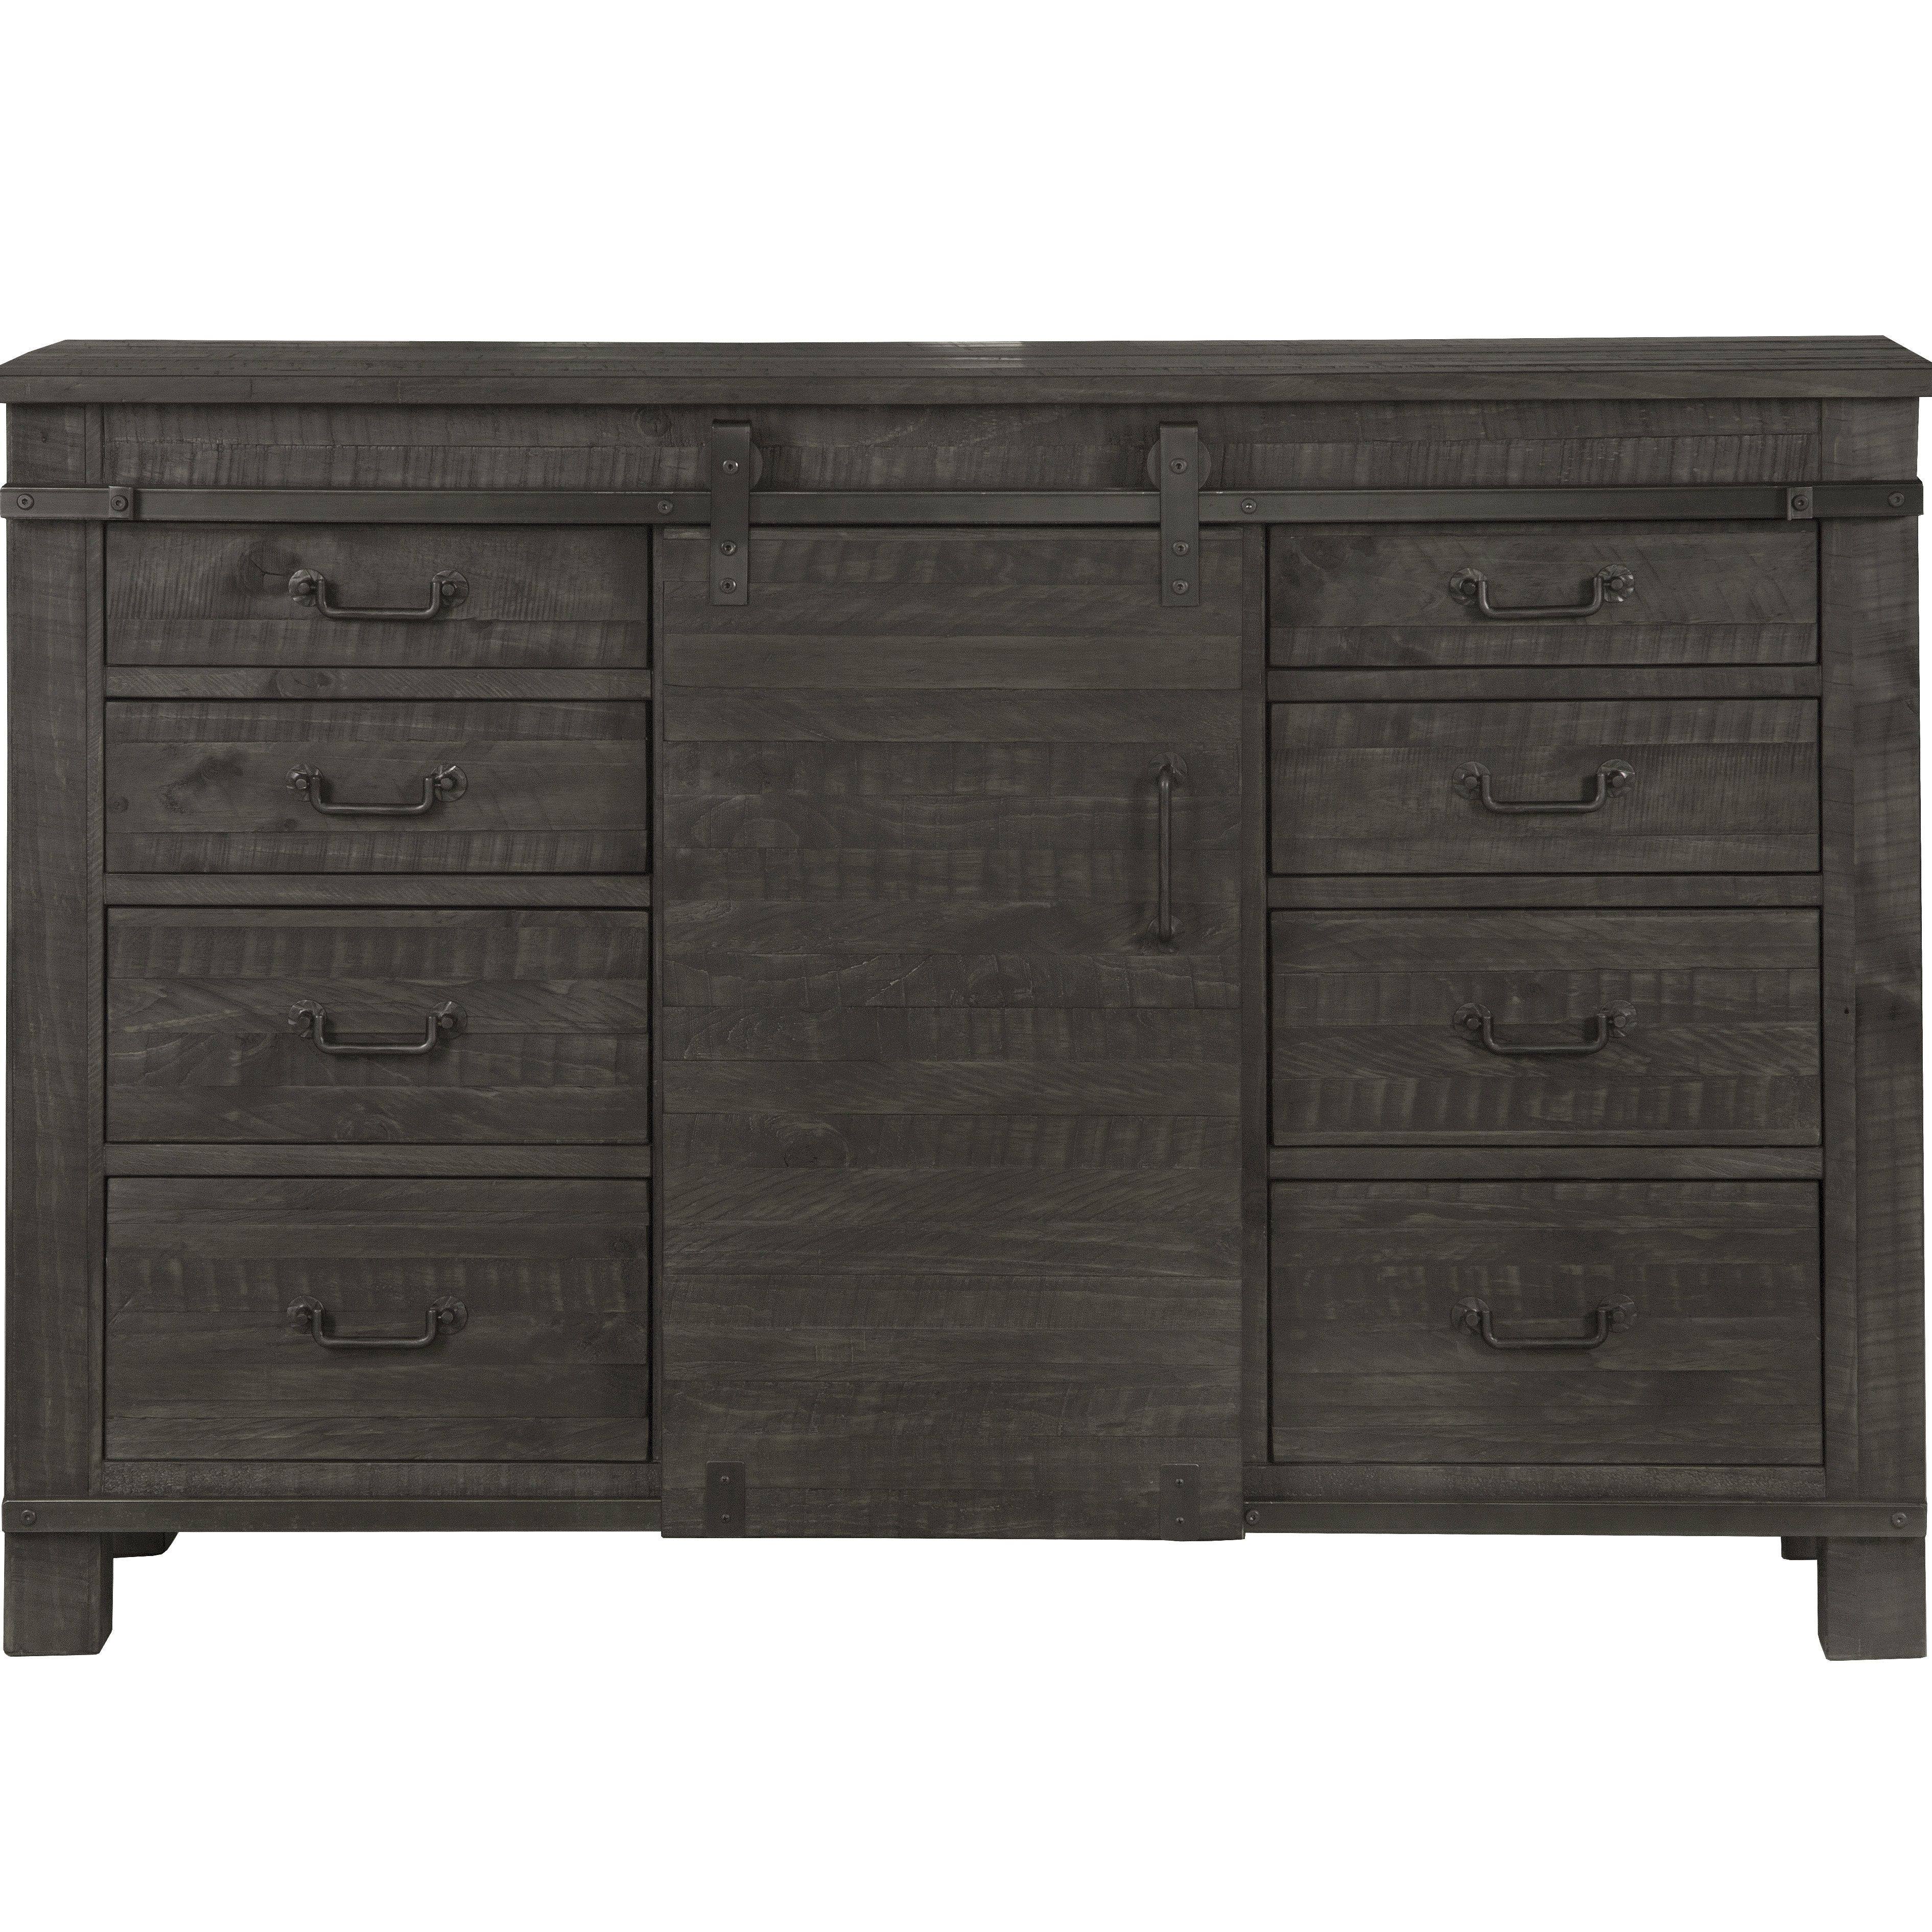 Carston Sideboard Throughout Most Popular Ellenton Sideboards (View 10 of 20)